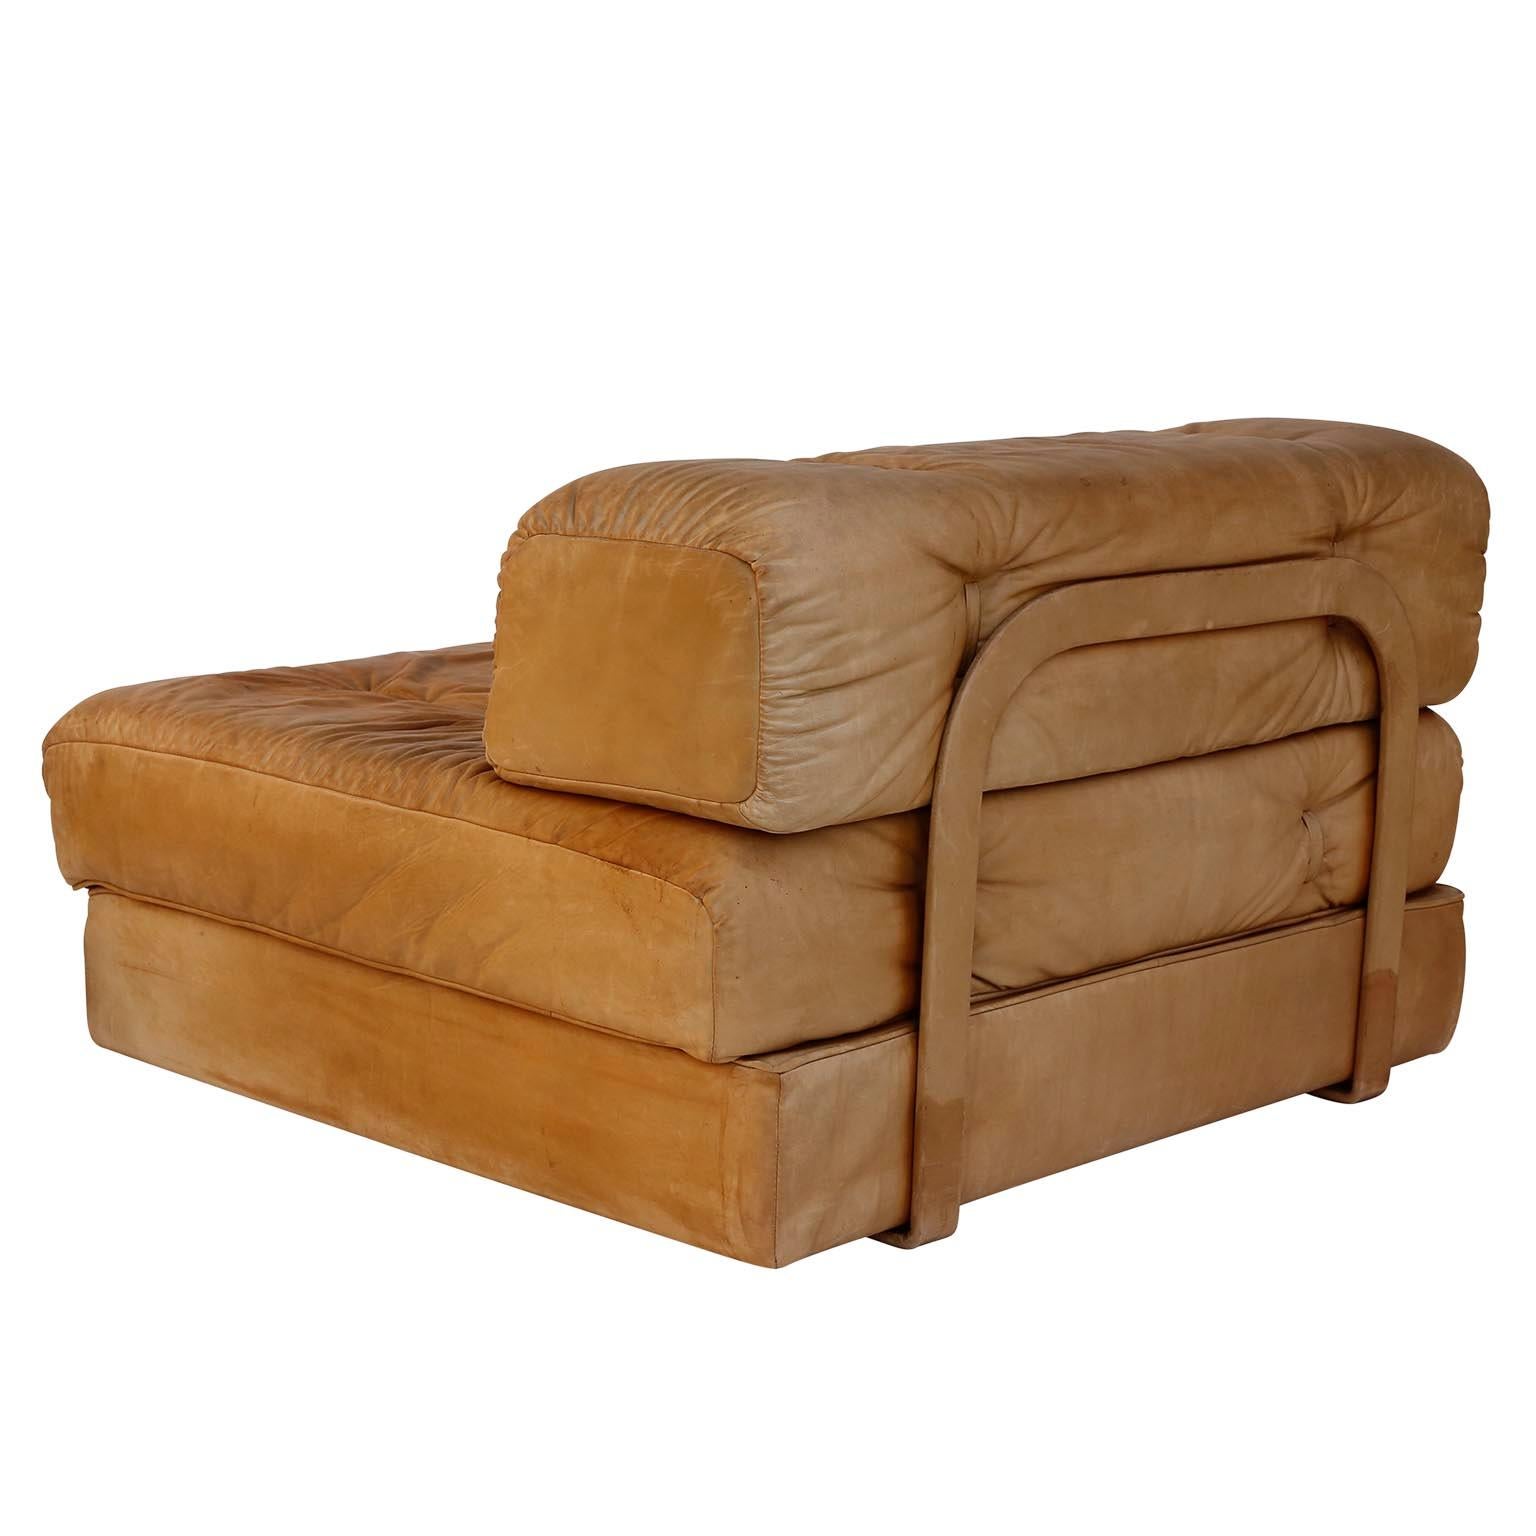 Late 20th Century Pair of Chairs Convertable Bed Daybed Sofa 'Atrium', Wittmann, Cognac Leather